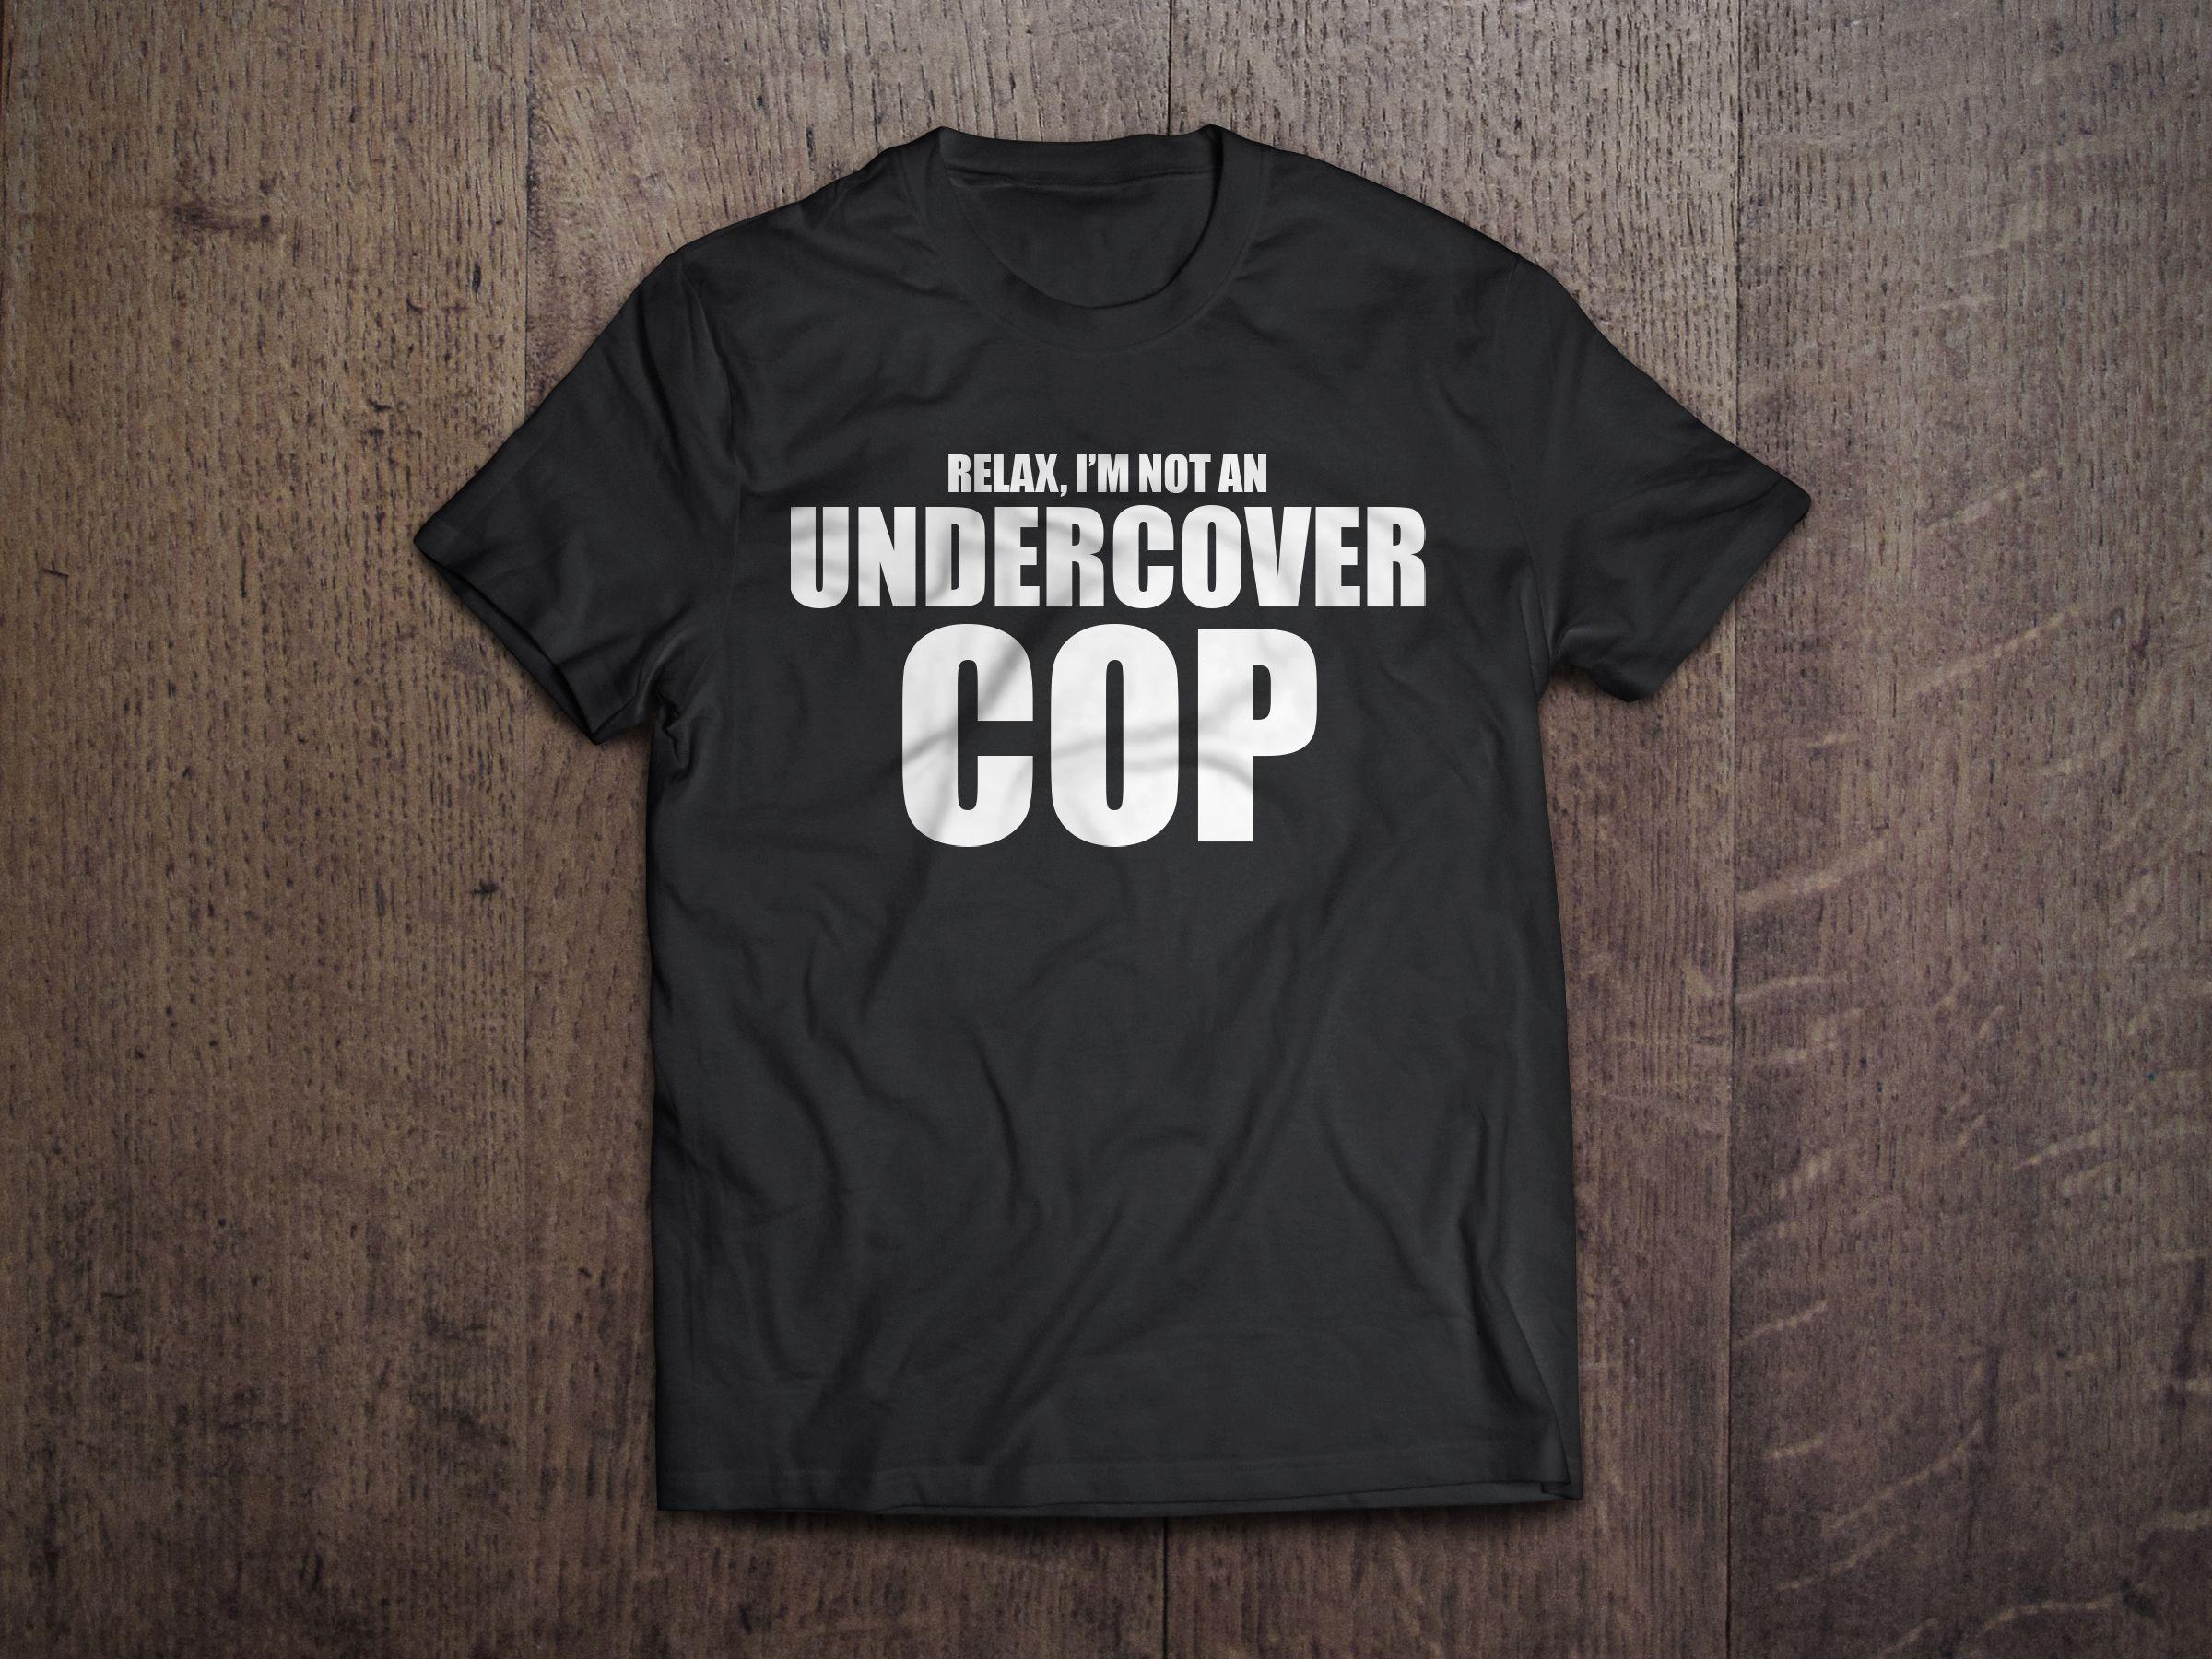 Undercover Police Logo - Relax, I'm Not an Undercover Cop | Drinking T-shirts | Shirts ...